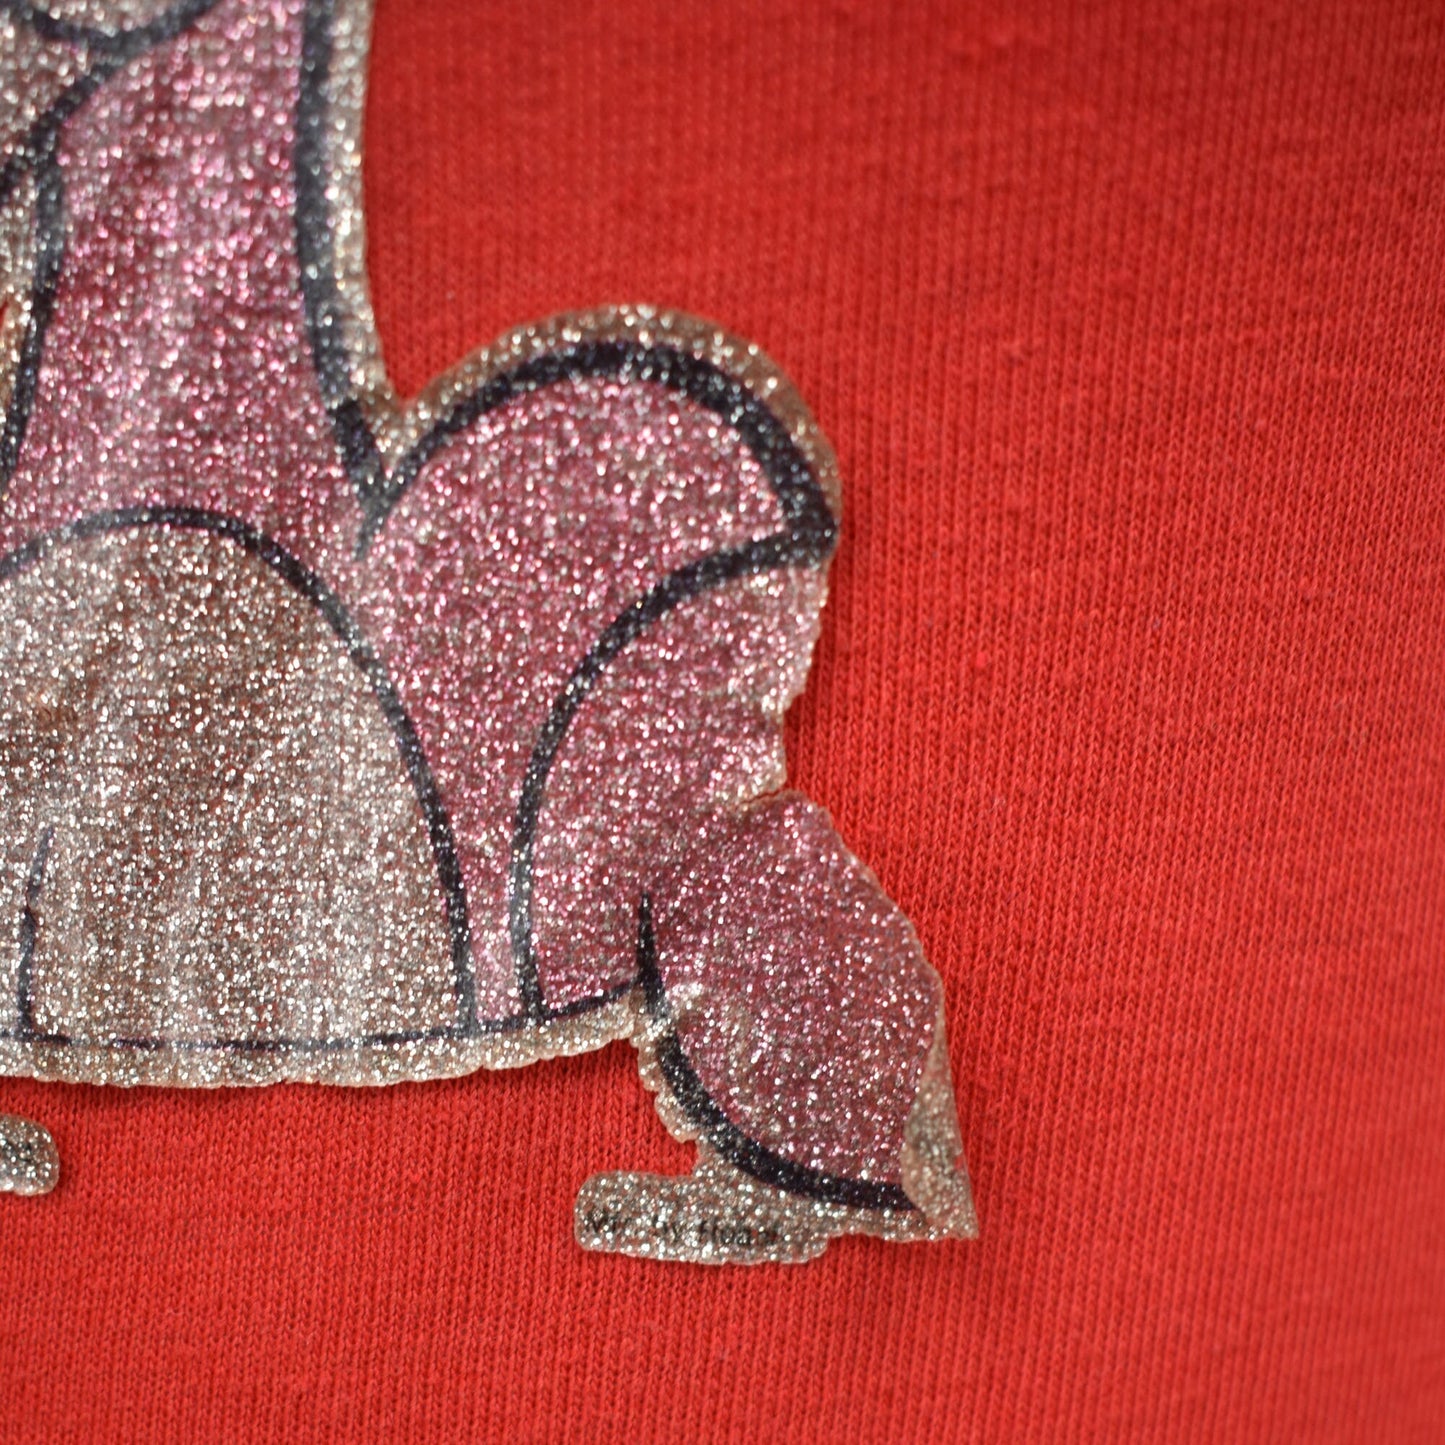 Vintage 80s Pink Panther Sparkly Heat Transfer T-shirt - As Is - No Kidding - Flocked Letters - Cooper Font